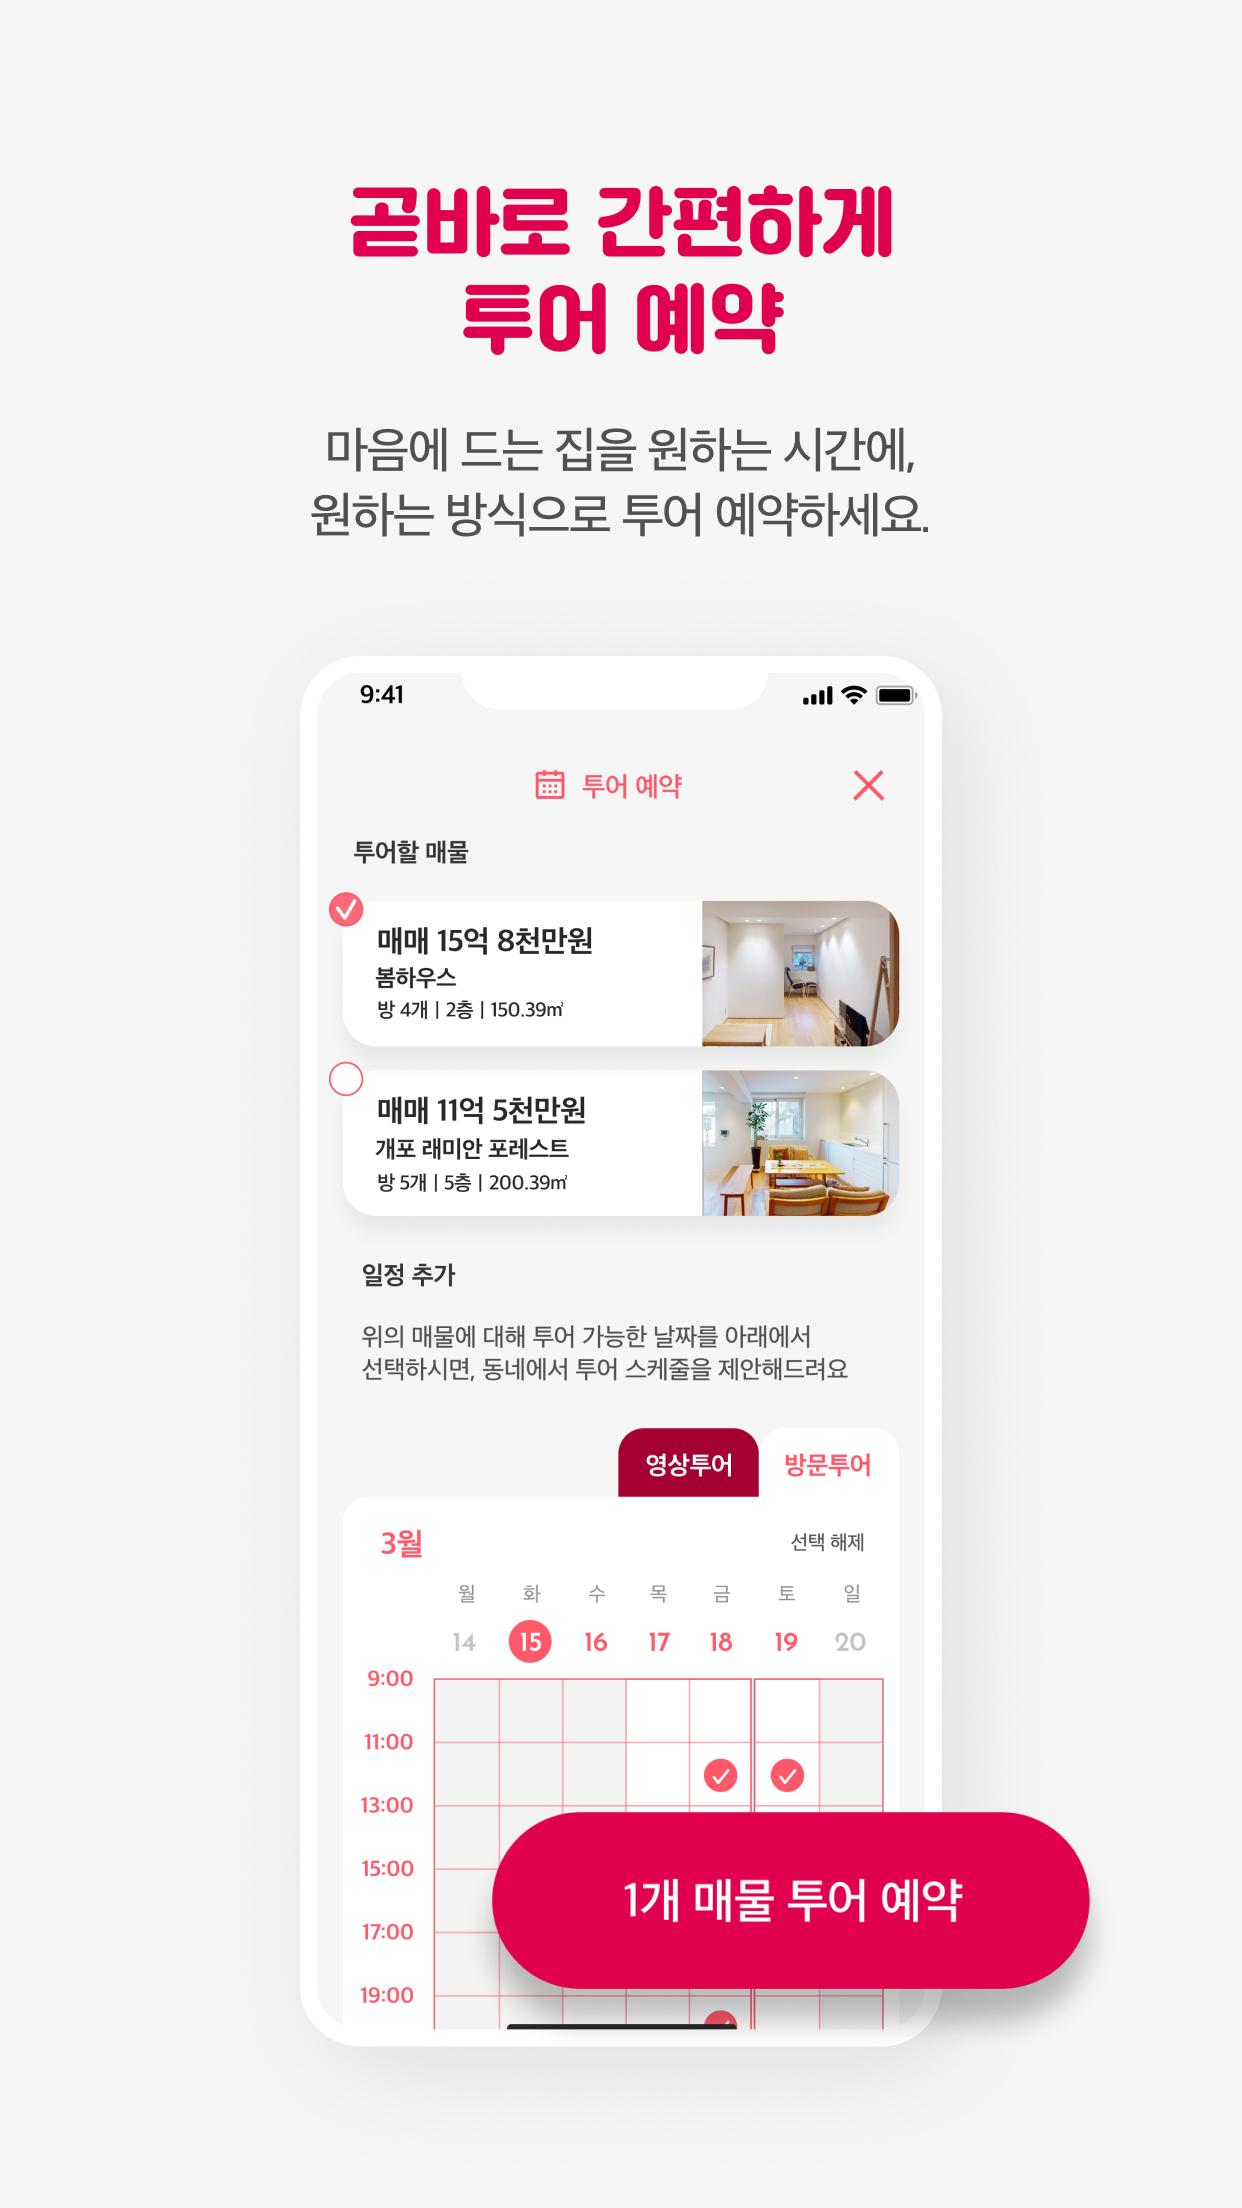 Dongnae Real Estate: Find Your Home 1.0.2 Screenshot 9